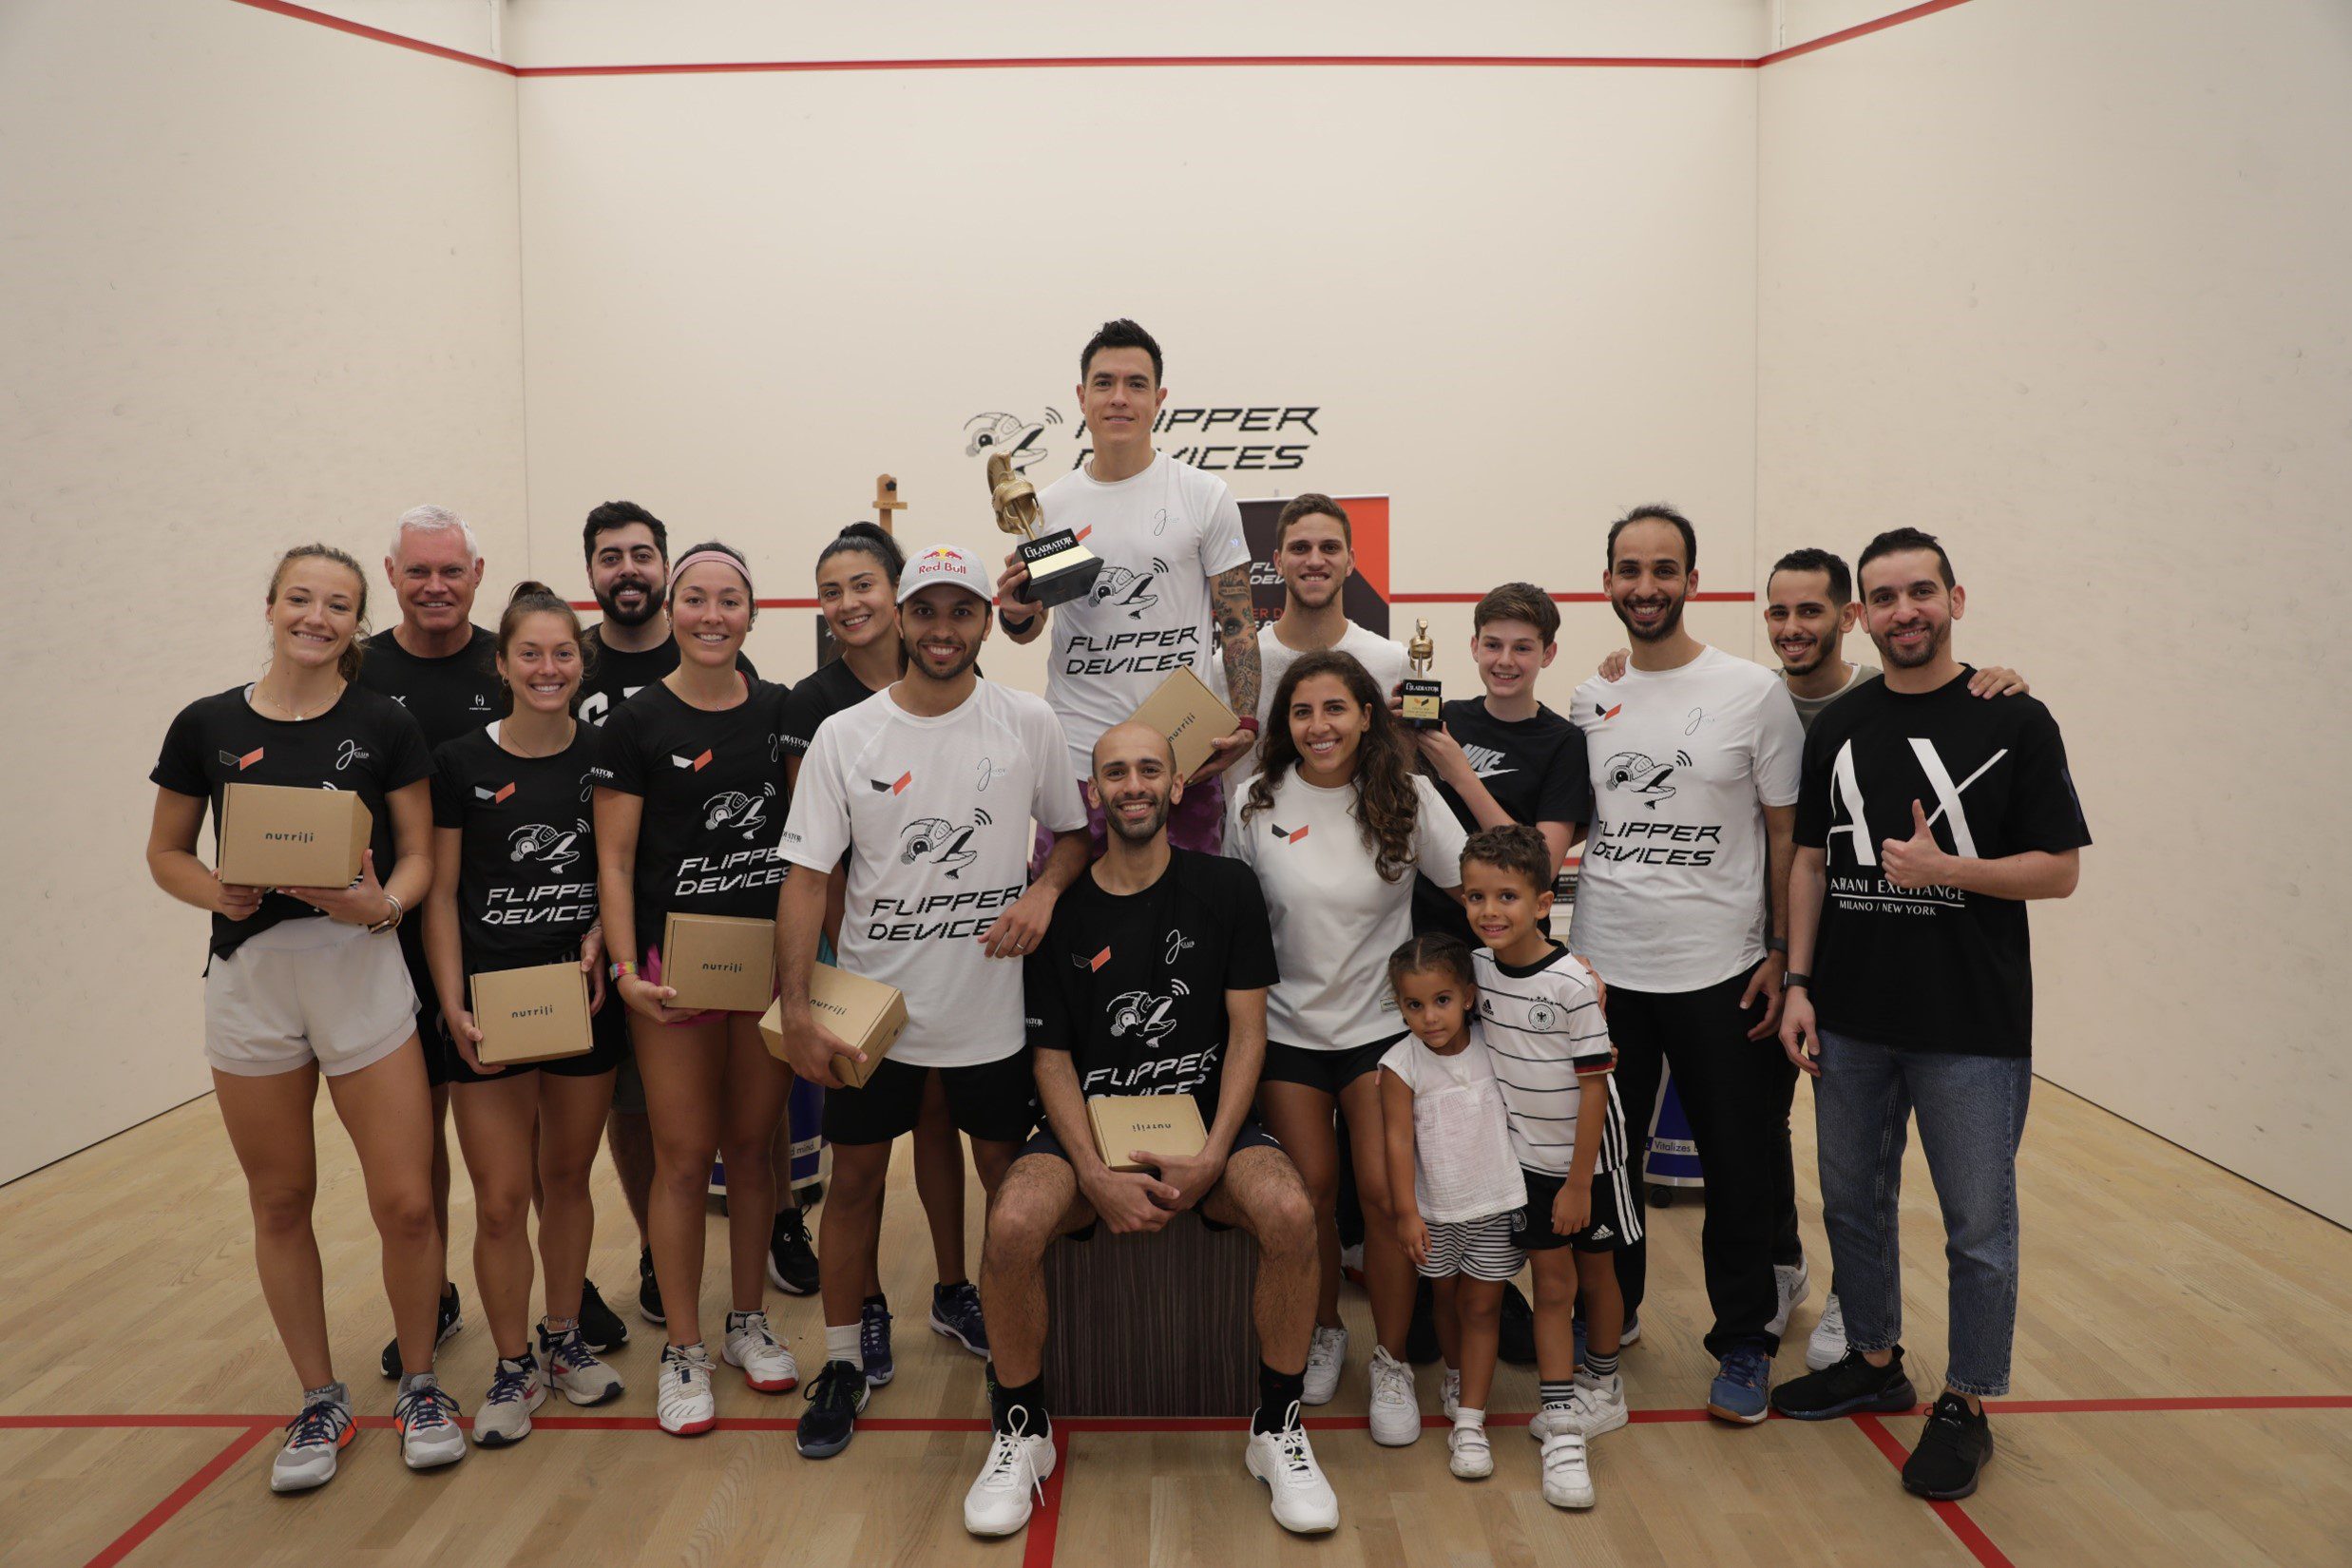 The Flying DAF Squash Academy camp was divided into two phases at the J Club